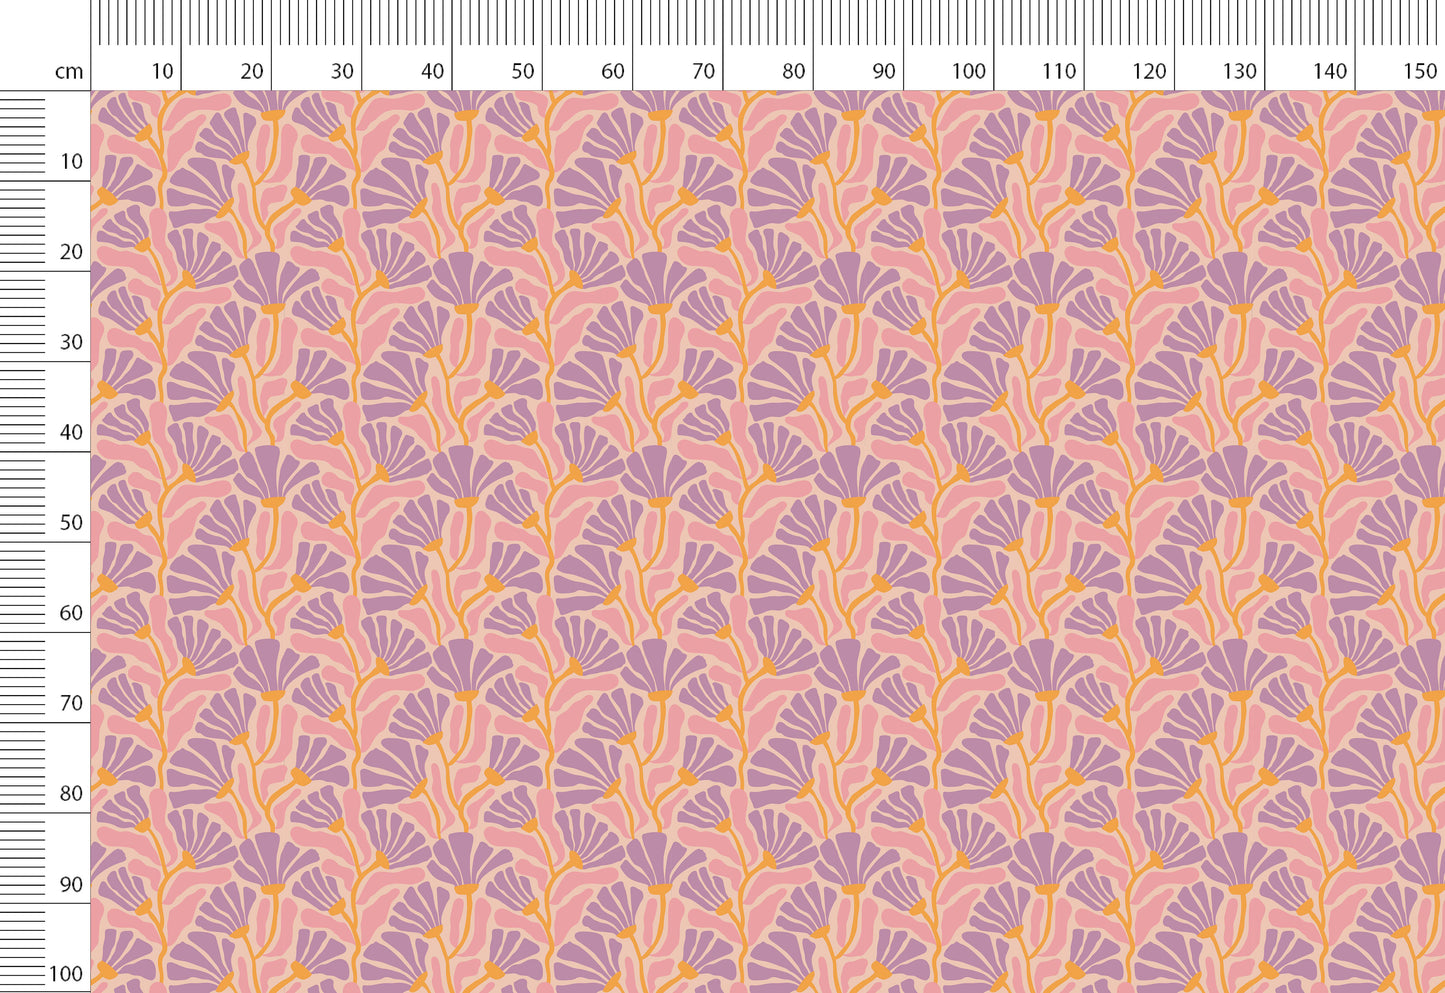 Retro Floral Print Linen By The Yard or Meter, Retro Funky Flowers Print Linen Fabric For Clothing, Bedding, Curtains & Upholstery